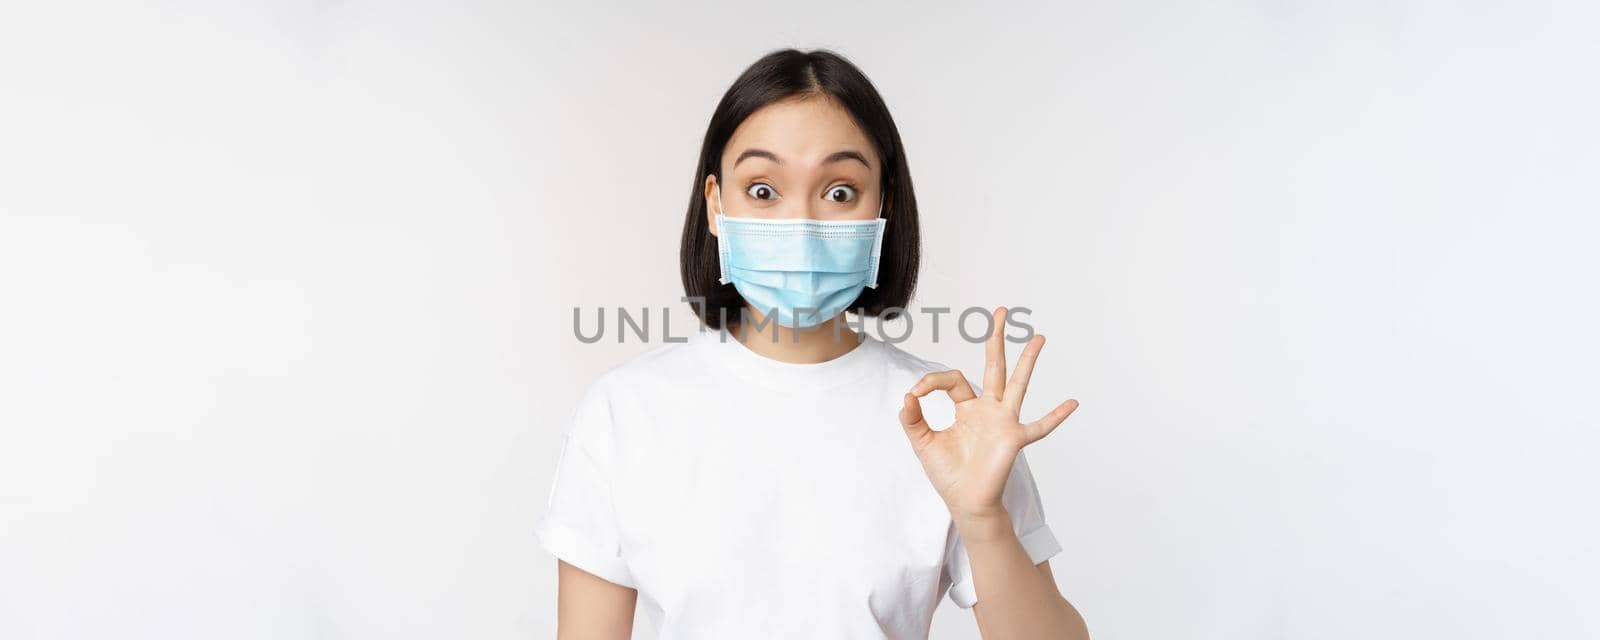 Covid-19, healthcare and medical concept. Impressed asian woman in medical mask, looking amazed and showing ok, okay sign, standing over white background.